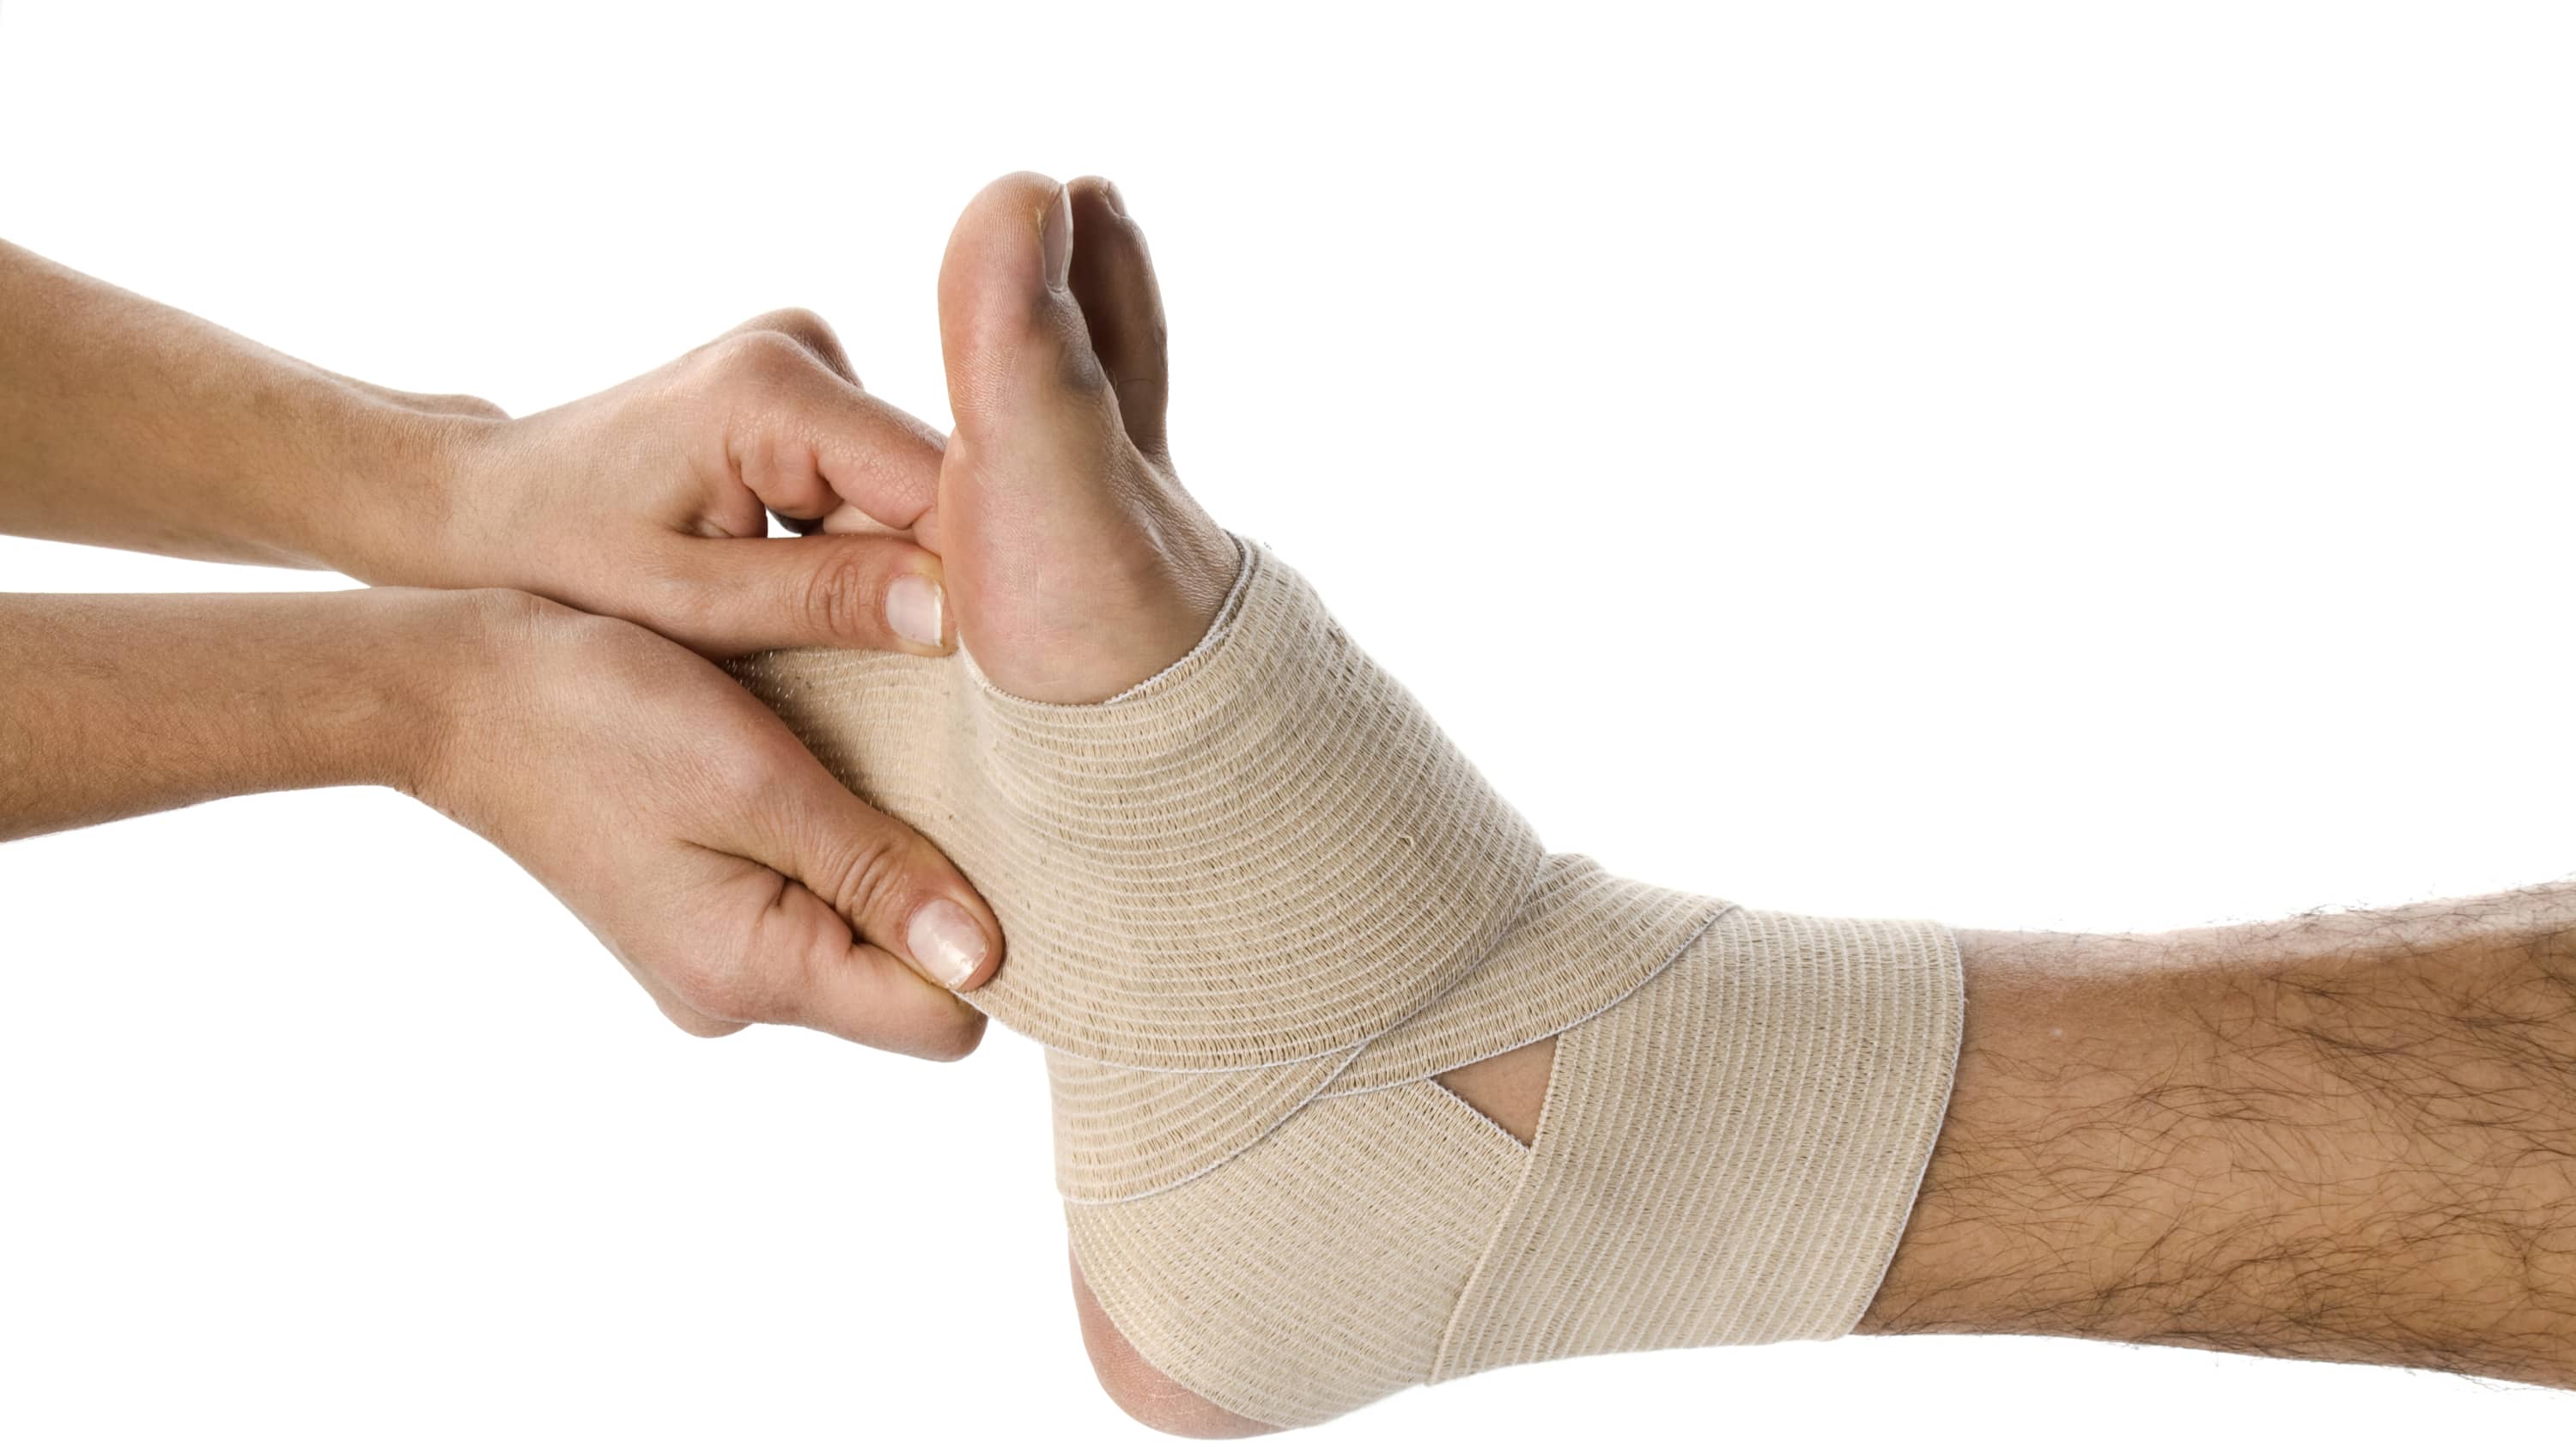 a foot wrapped in bandage, possibly from a stress fracture